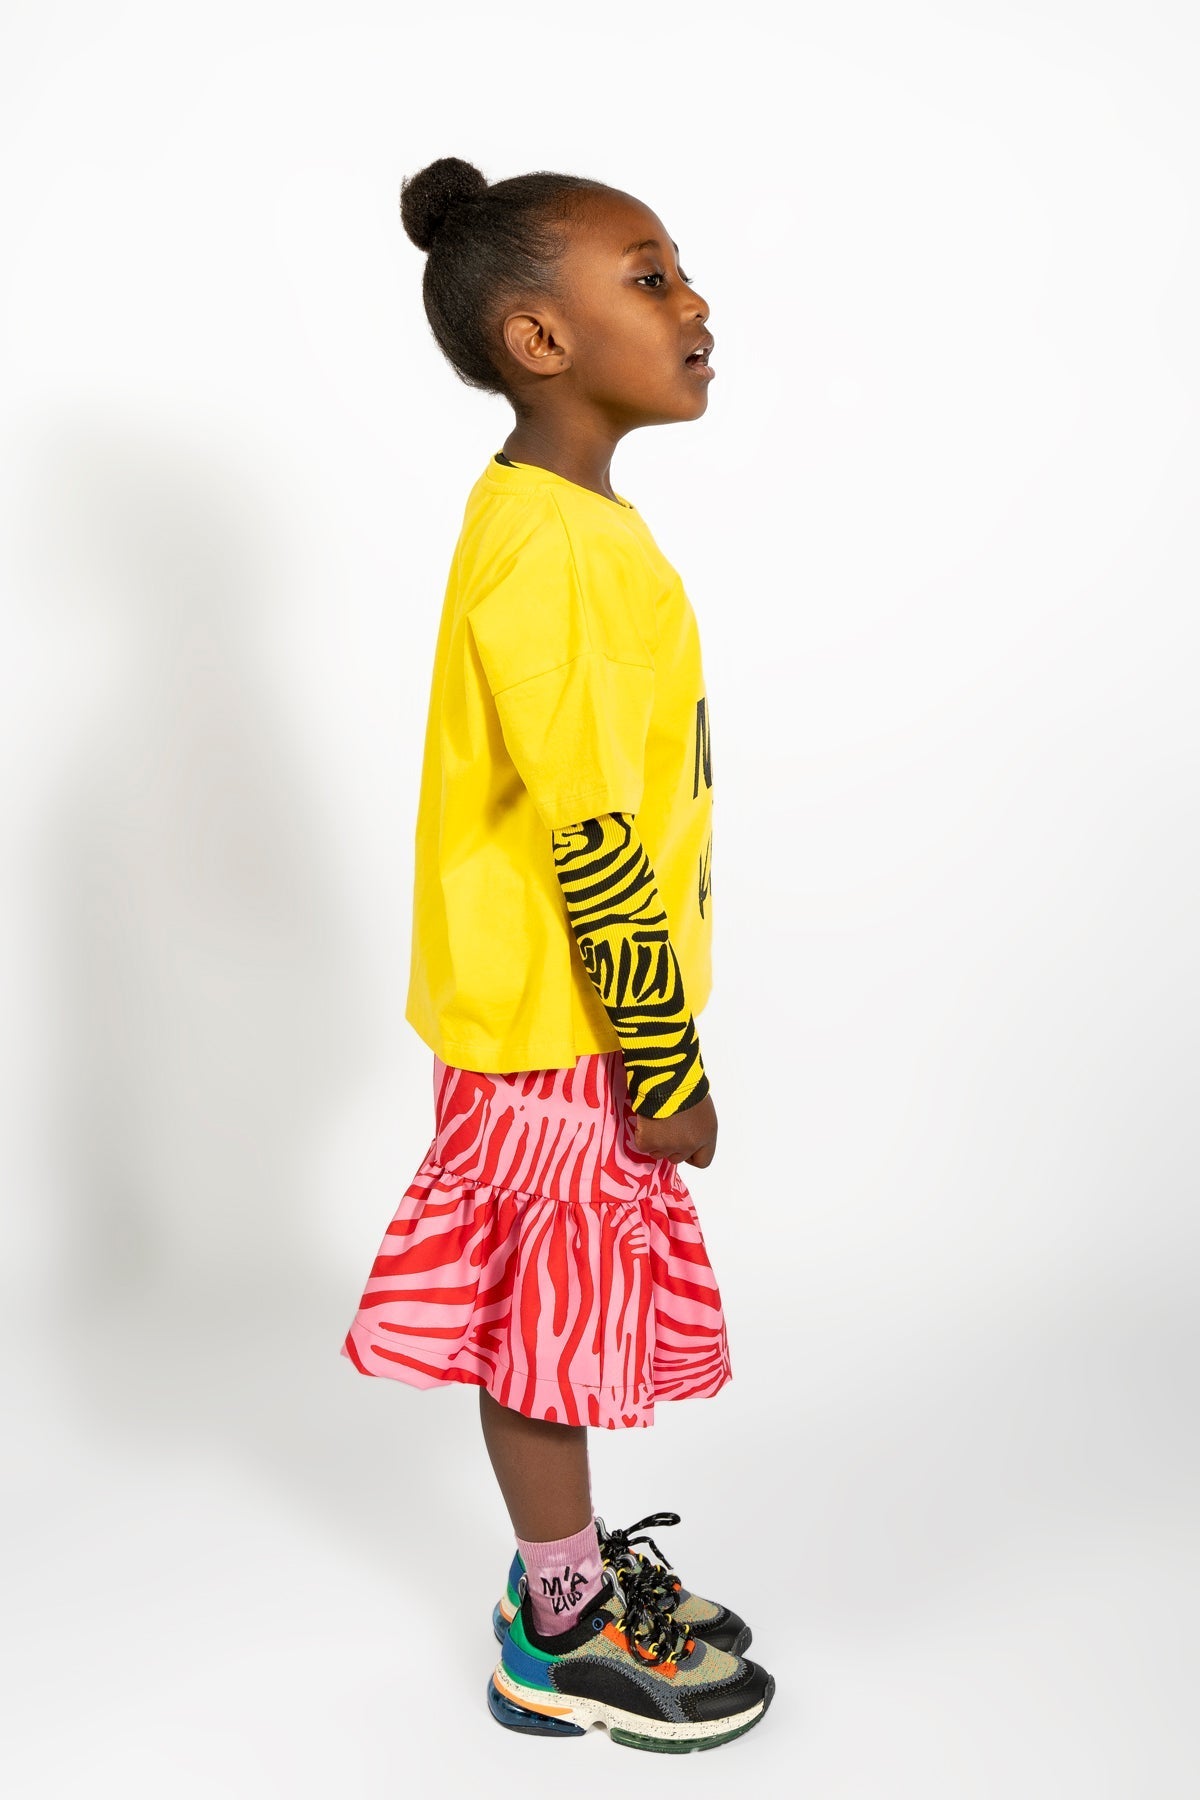 YELLOW EMBROIDERED LOOSE T-SHIRT MA KIDS